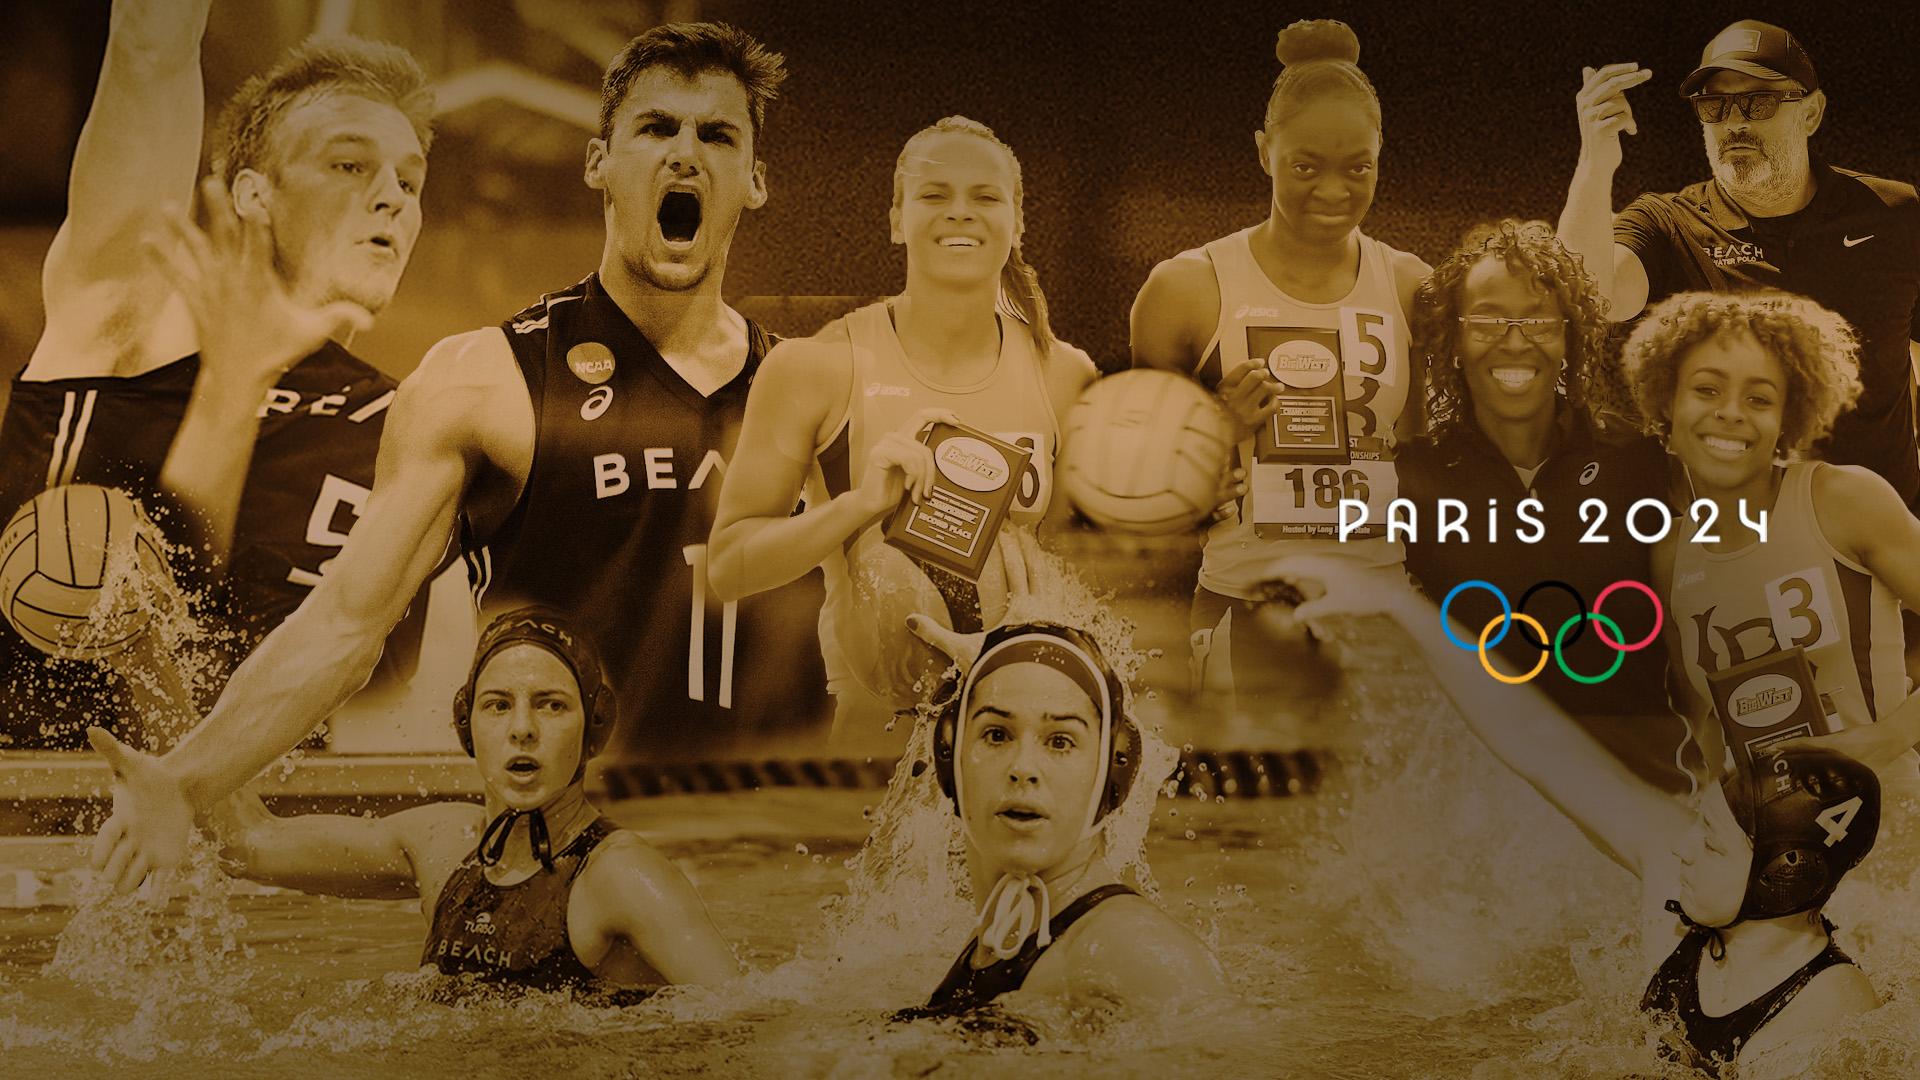 A composite image showing several coaches and athletes connected to Long Beach State who are set to appear in the 2024 Olympics. The phrase "Paris 2024" and the Olympics logo appear near the right edge of the image.